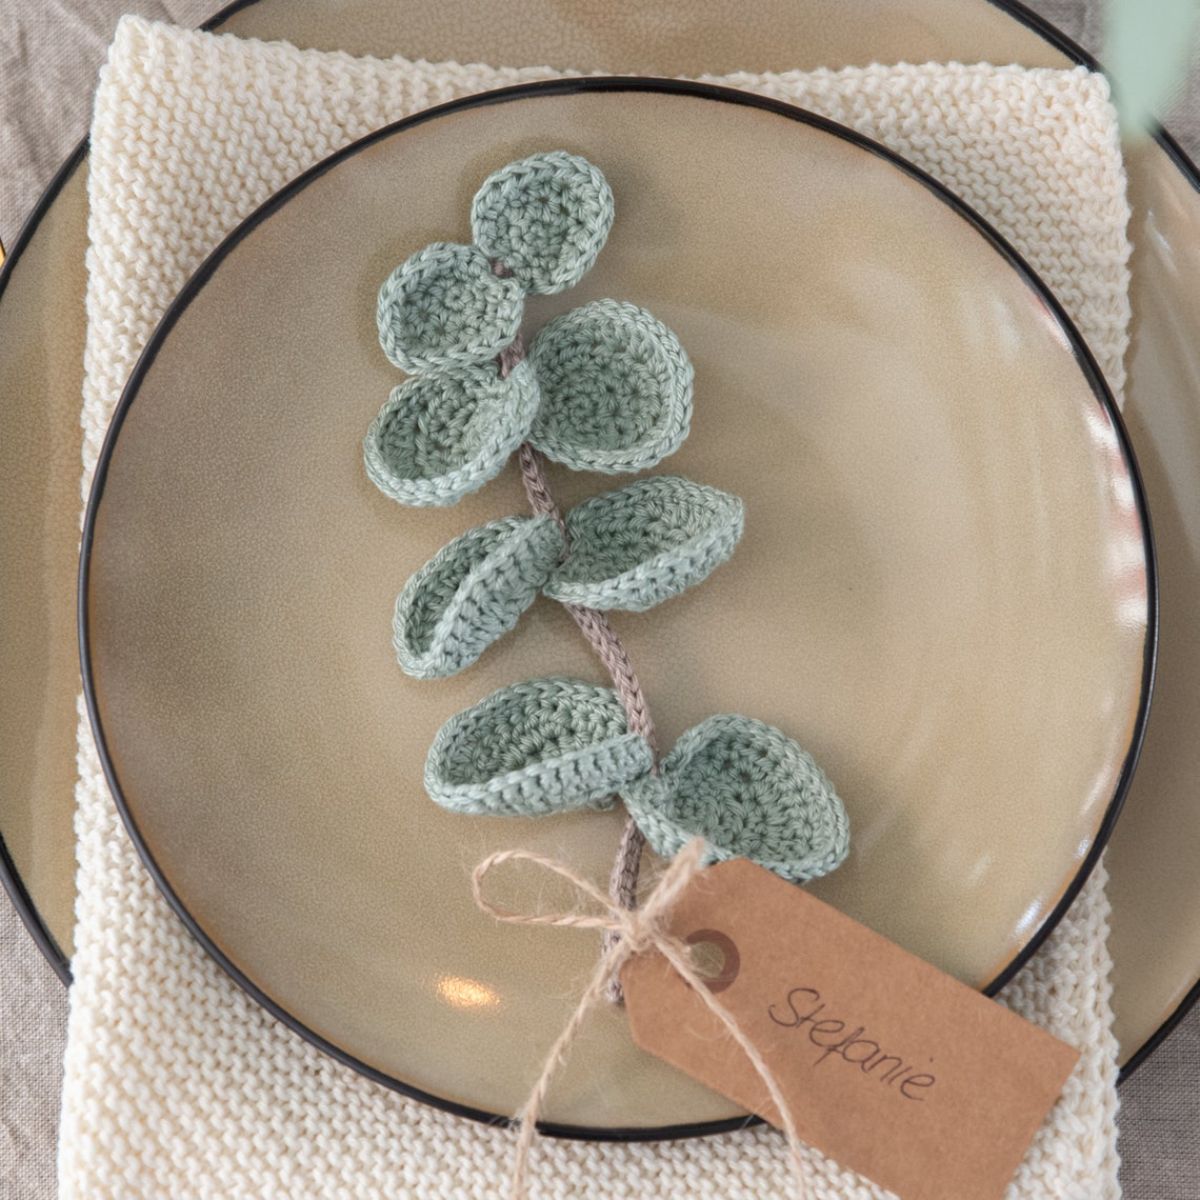 A light green crochet eucalyptus branch with lots of leaves on either side lying on a beige plate and placemat.